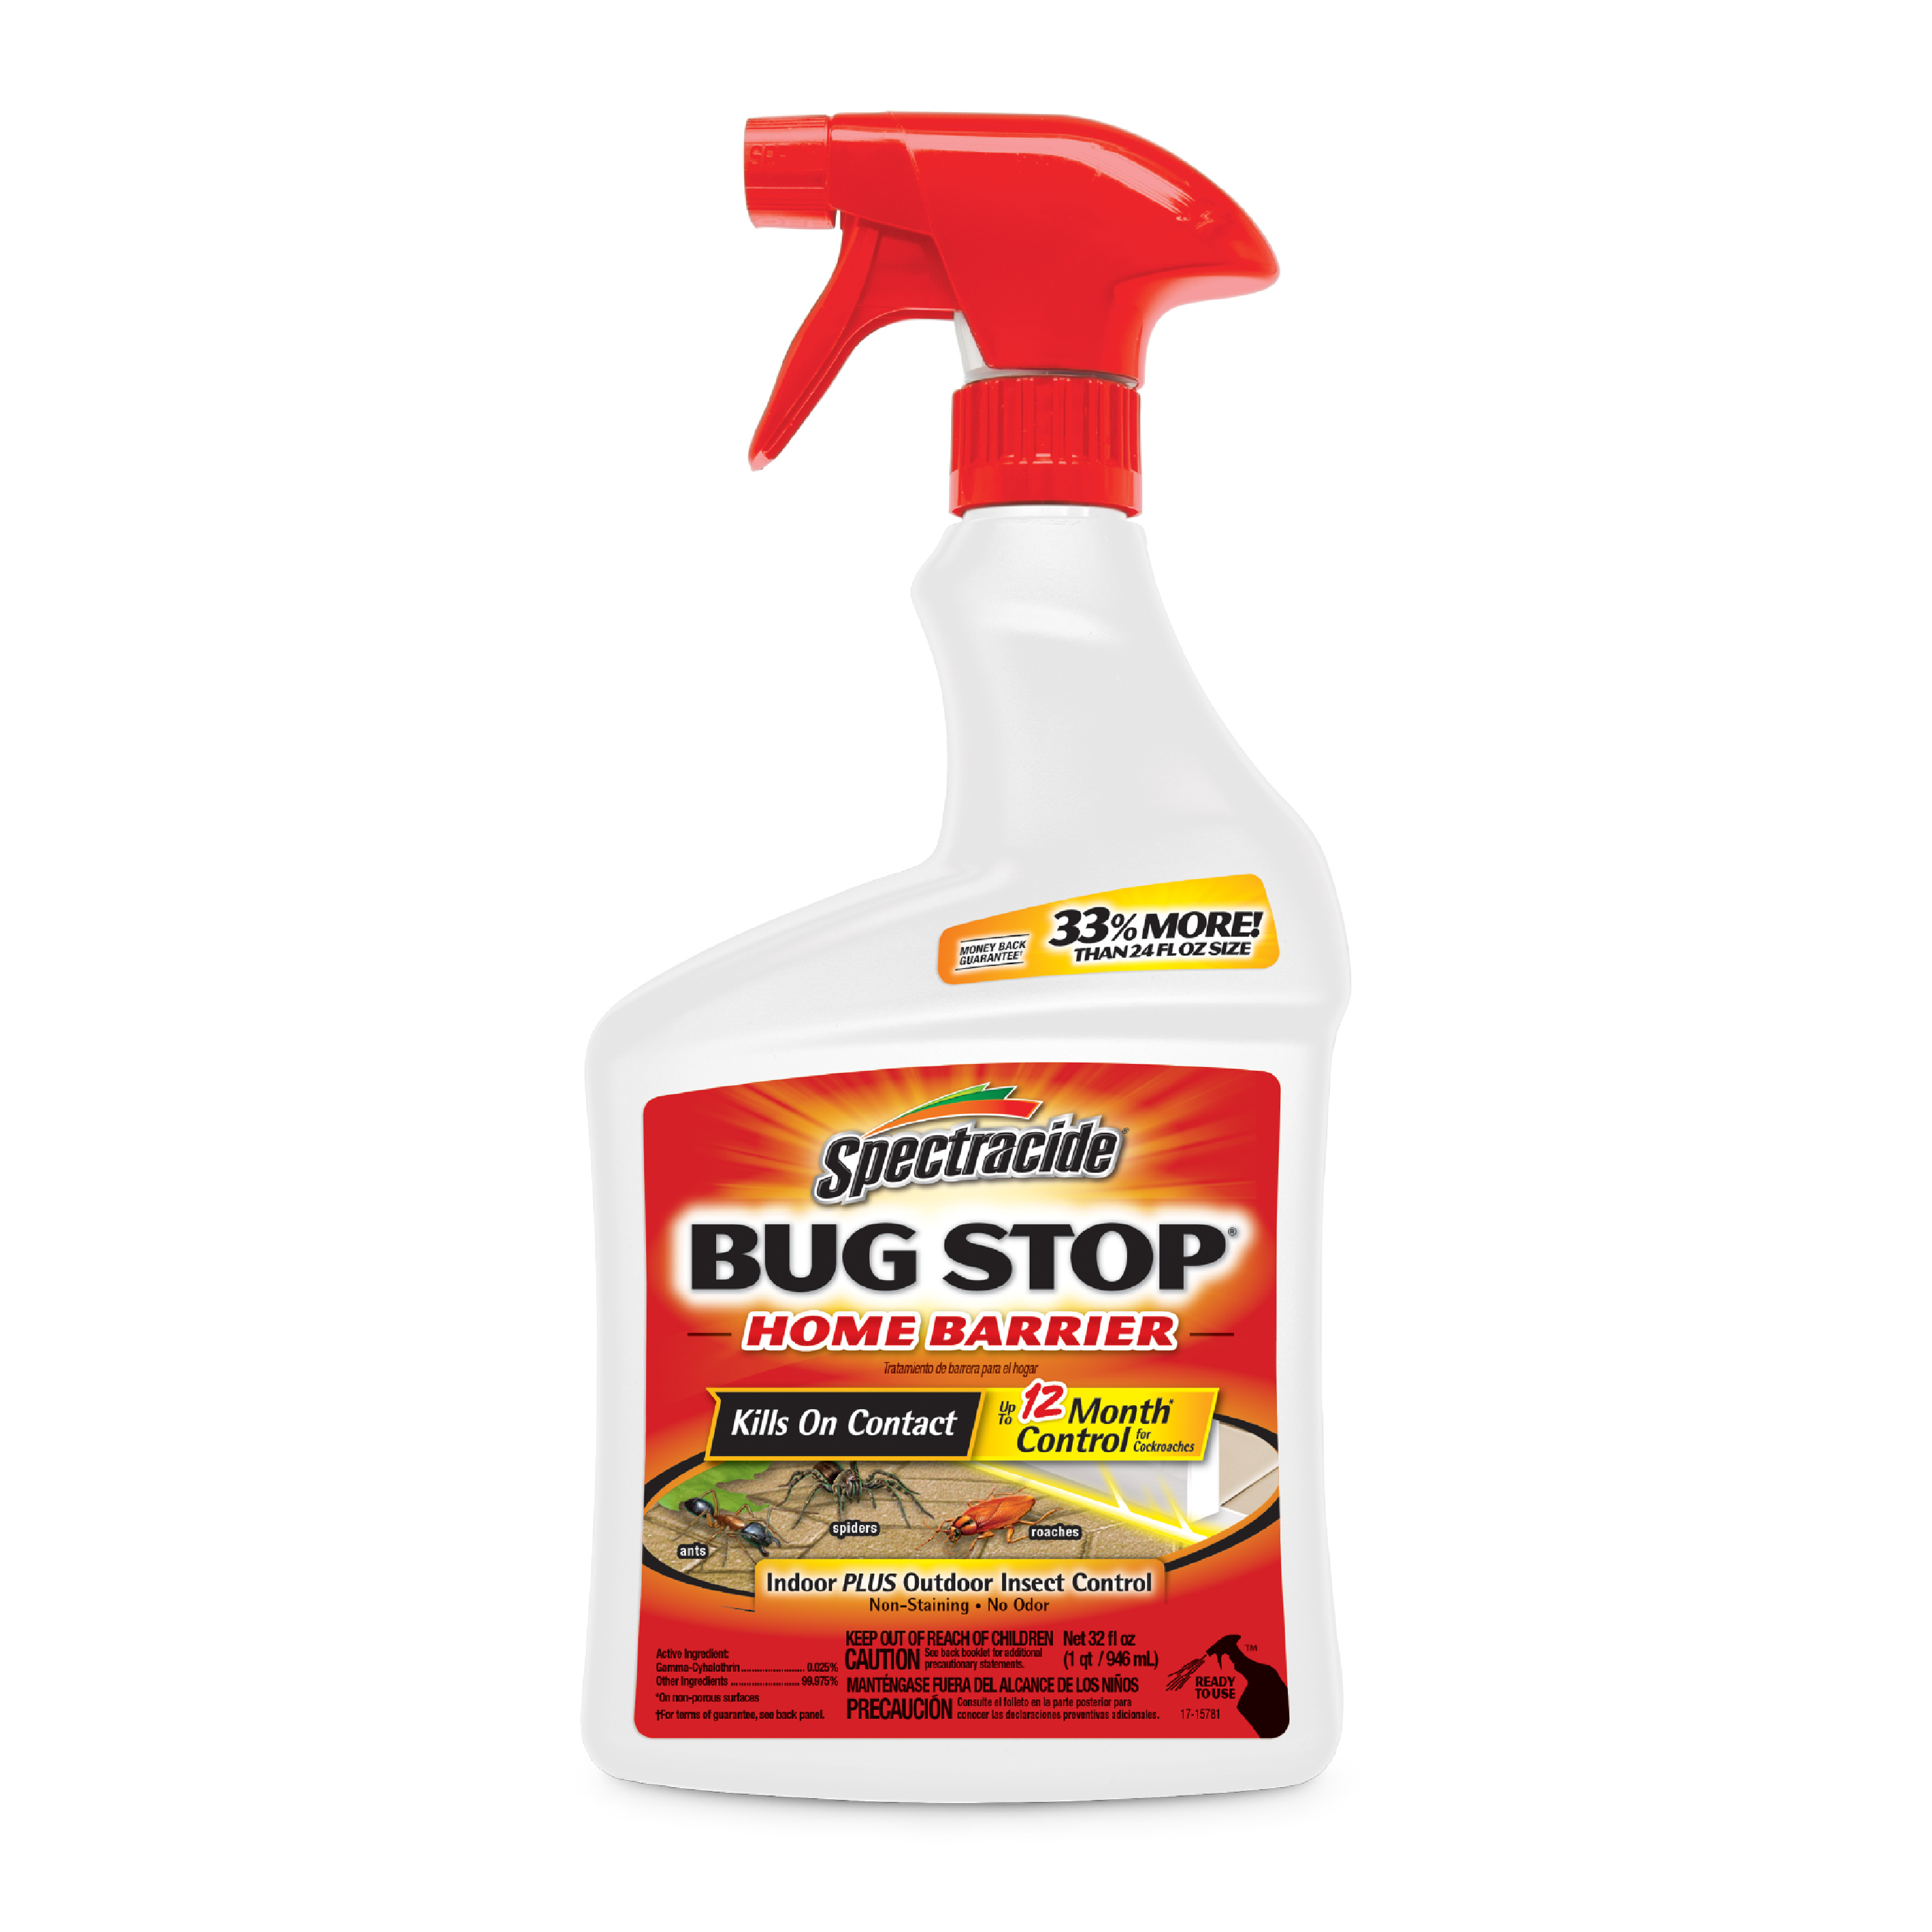 Spectracide Bug Stop Home Barrier, Kills Ants, Roaches, Spiders, Insect Control, 32 fl oz, Spray - image 1 of 11